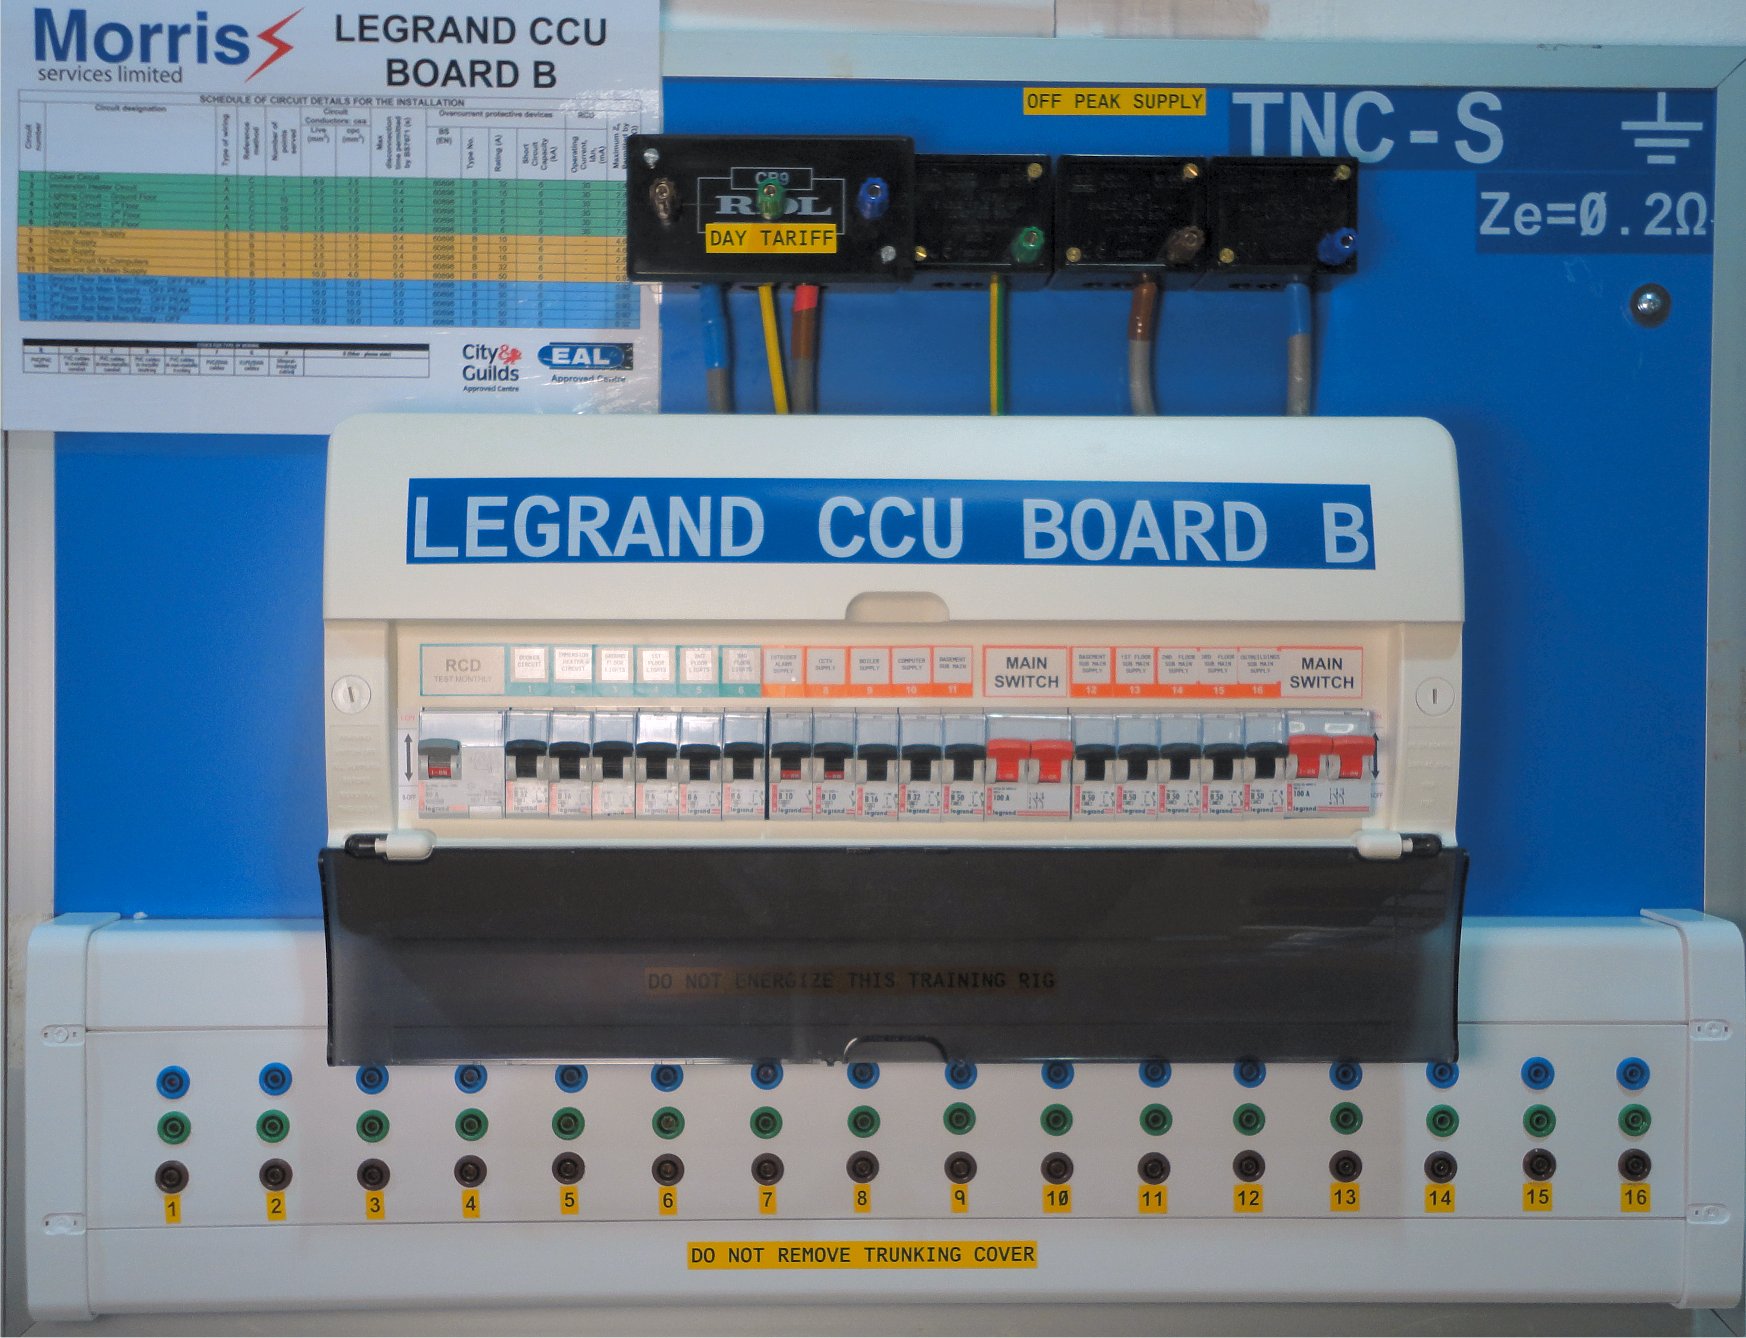 Legrand CCU Board B is used at Morris Services Limited to provide practical training and verification of earth fault loop impedance of final circuits and R1 + R2 measurred valueds on the City & Guilds 2394-01 Level 3 Initial Verification Course and the new EAL 7695 Level 3 Electrical Qualiifed Supervisors course.